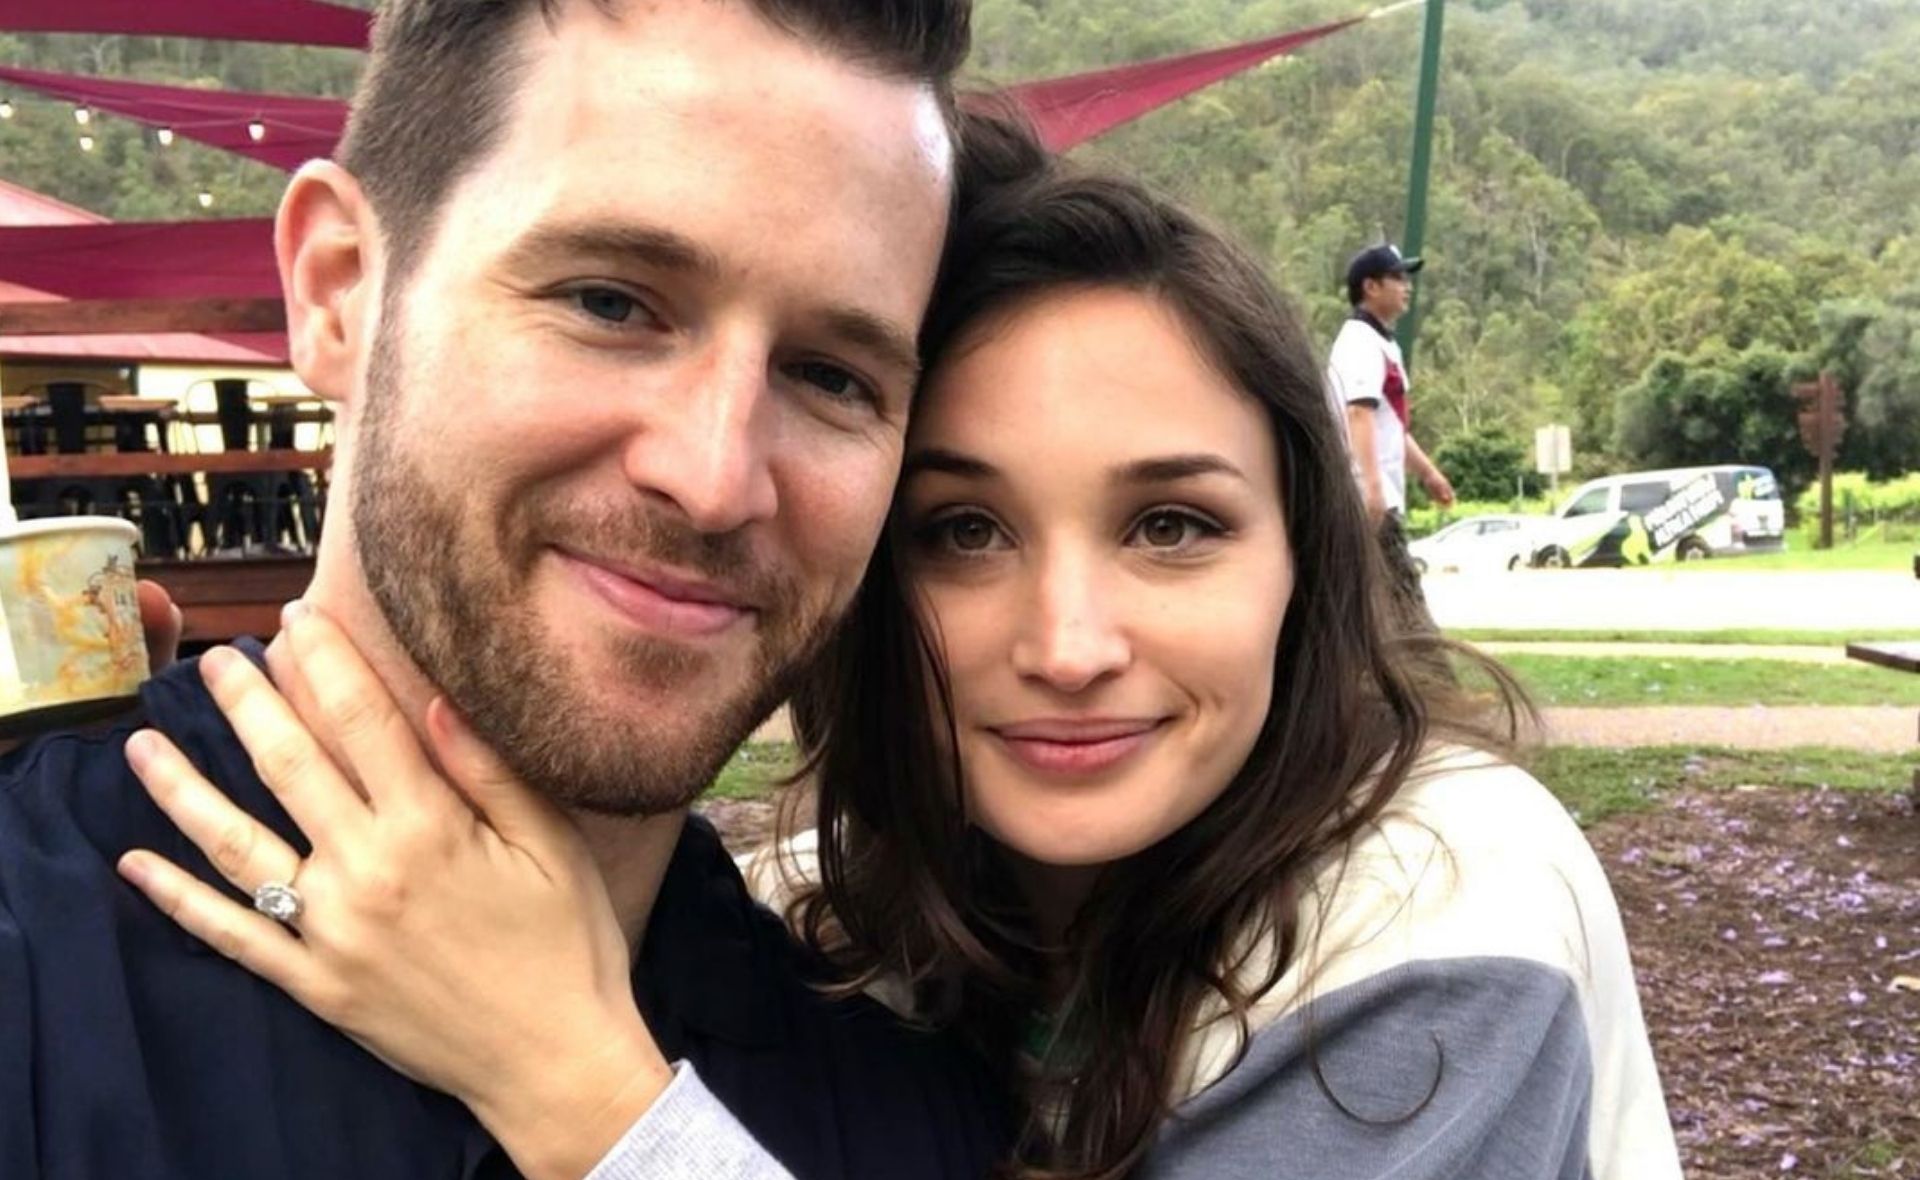 Another MAFS wedding! Matthew Bennett is officially engaged to his girlfriend Annabel Jameson